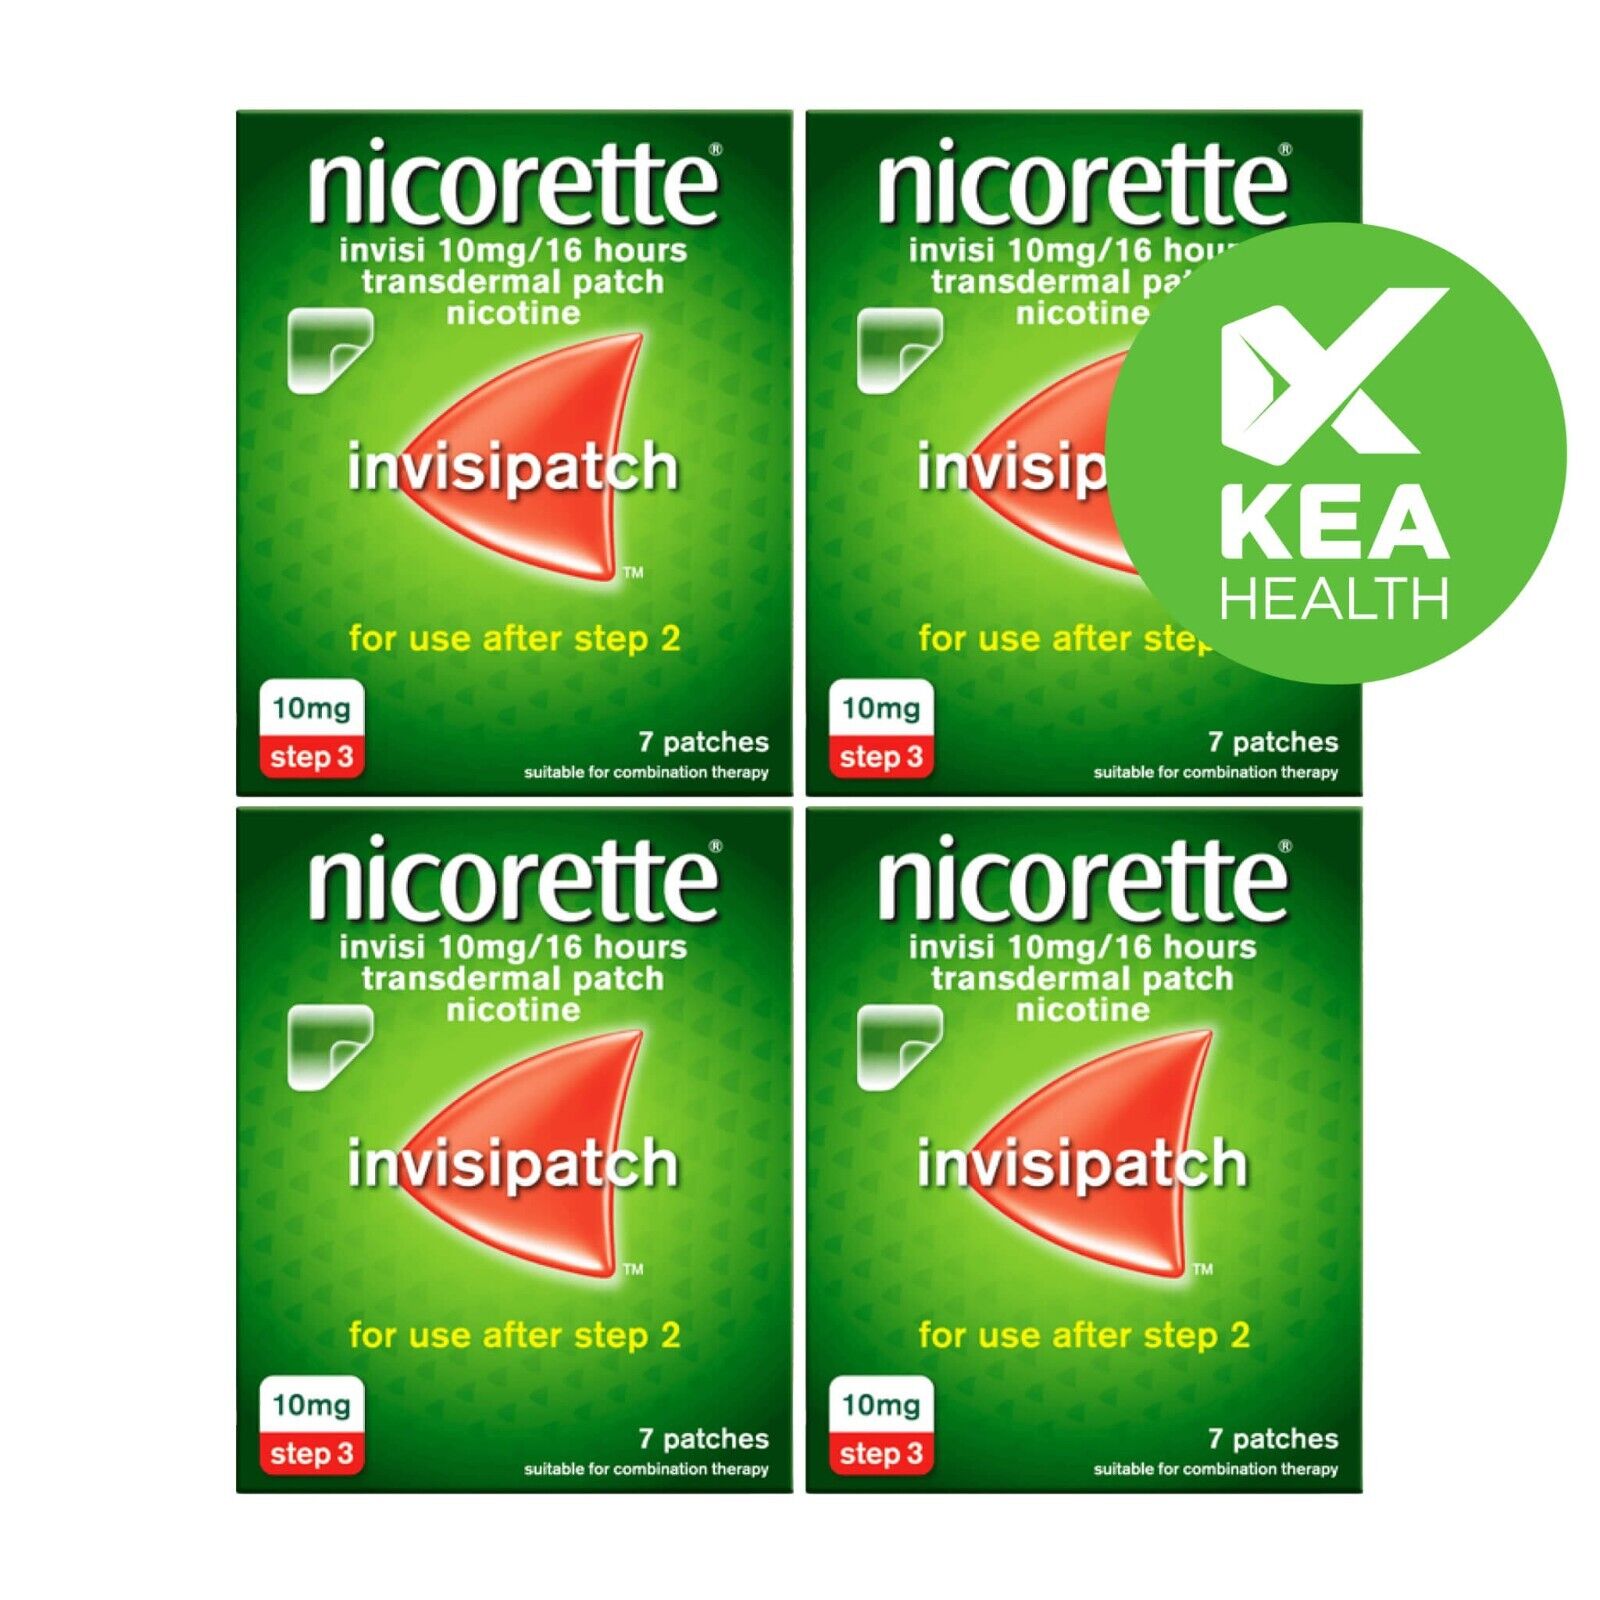 Nicorette Invisipatch Step 3 10mg - 28 Pieces - 4 boxes - Free US Shipping